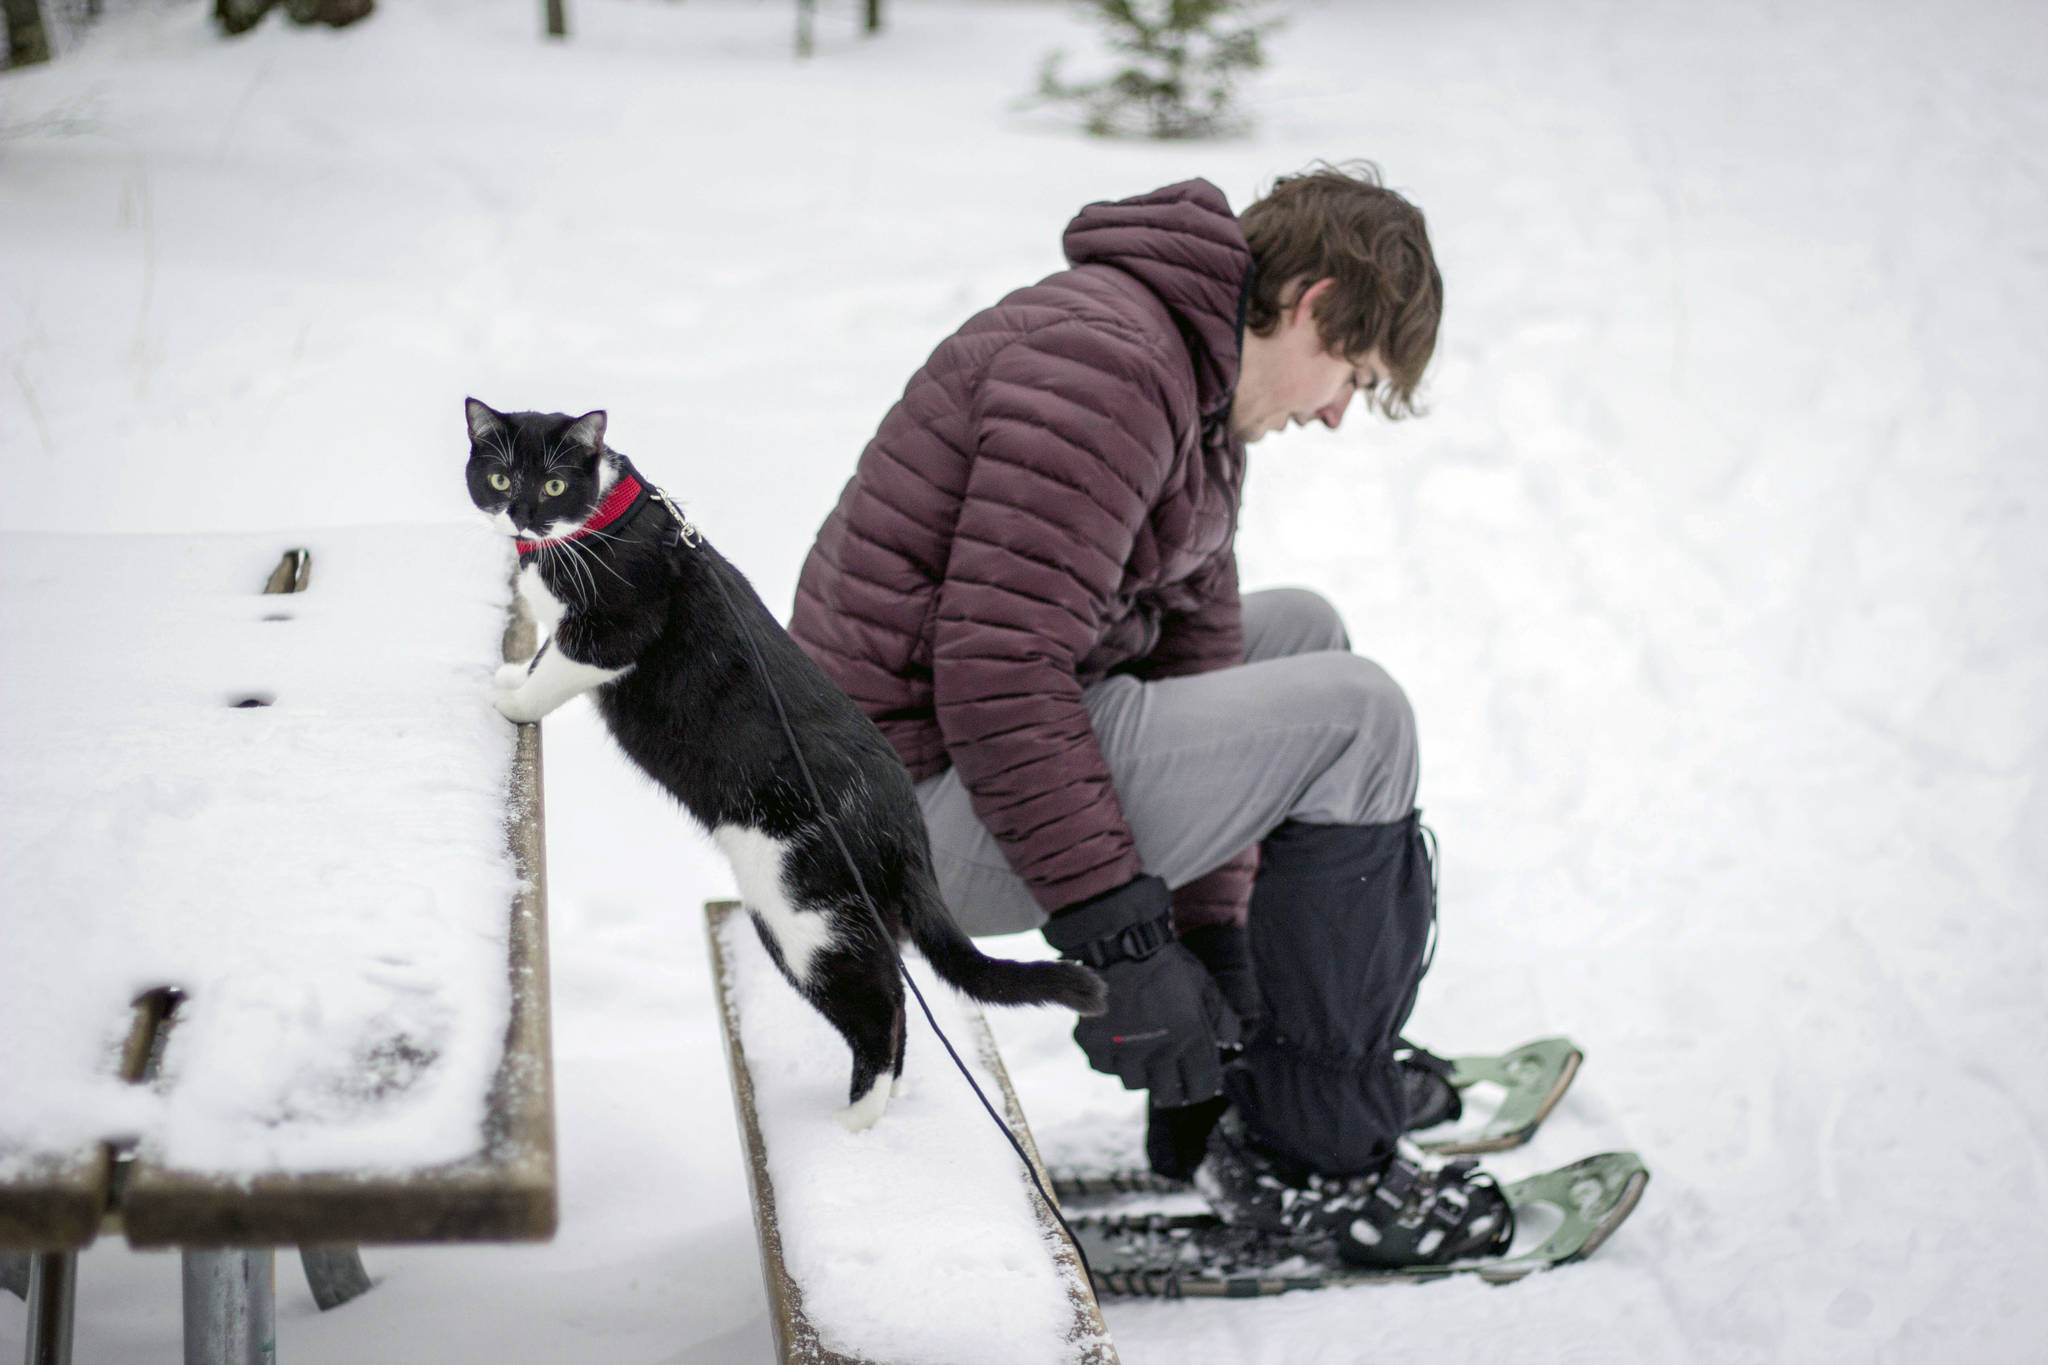 This Jan. 25, 2016 photo provided by Kim Randolph shows Ruger, the “adventure” cat, and Jeremy Vick in Marquette, Mich. (Kim Randolph via AP)